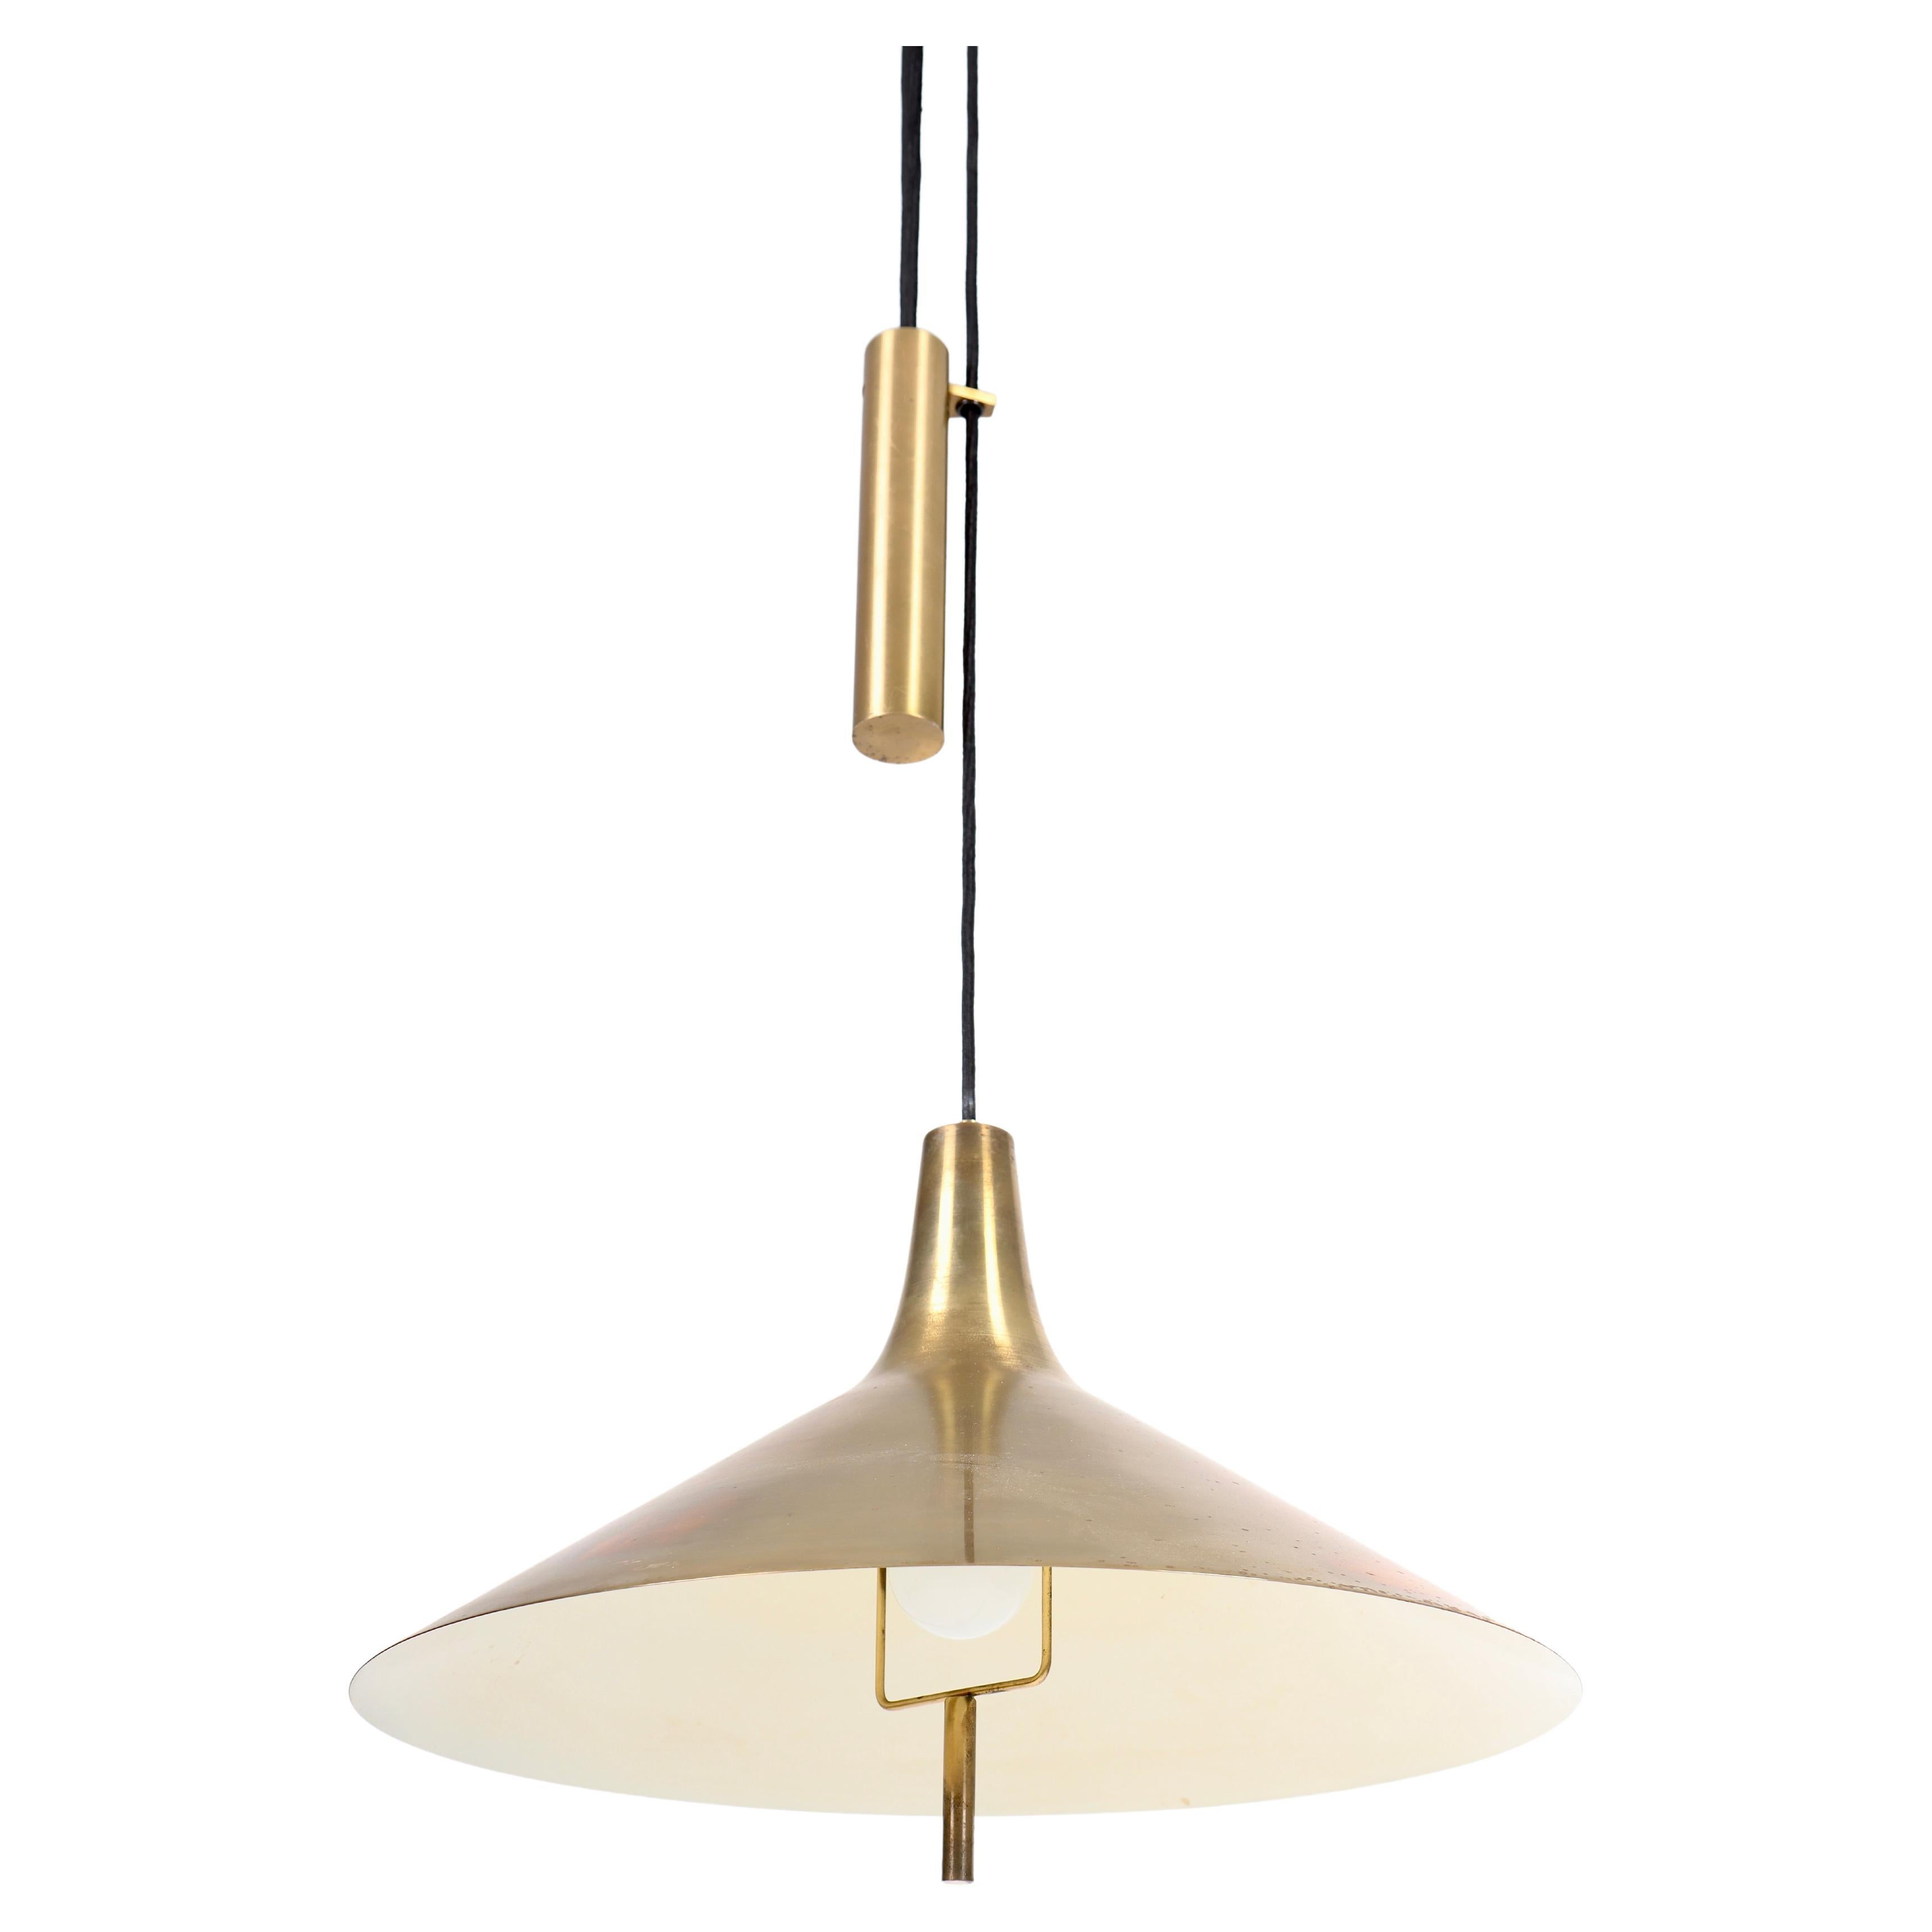 Midcentury Ceiling Lamp in Brass by T.H. Valentiner, 1960s For Sale